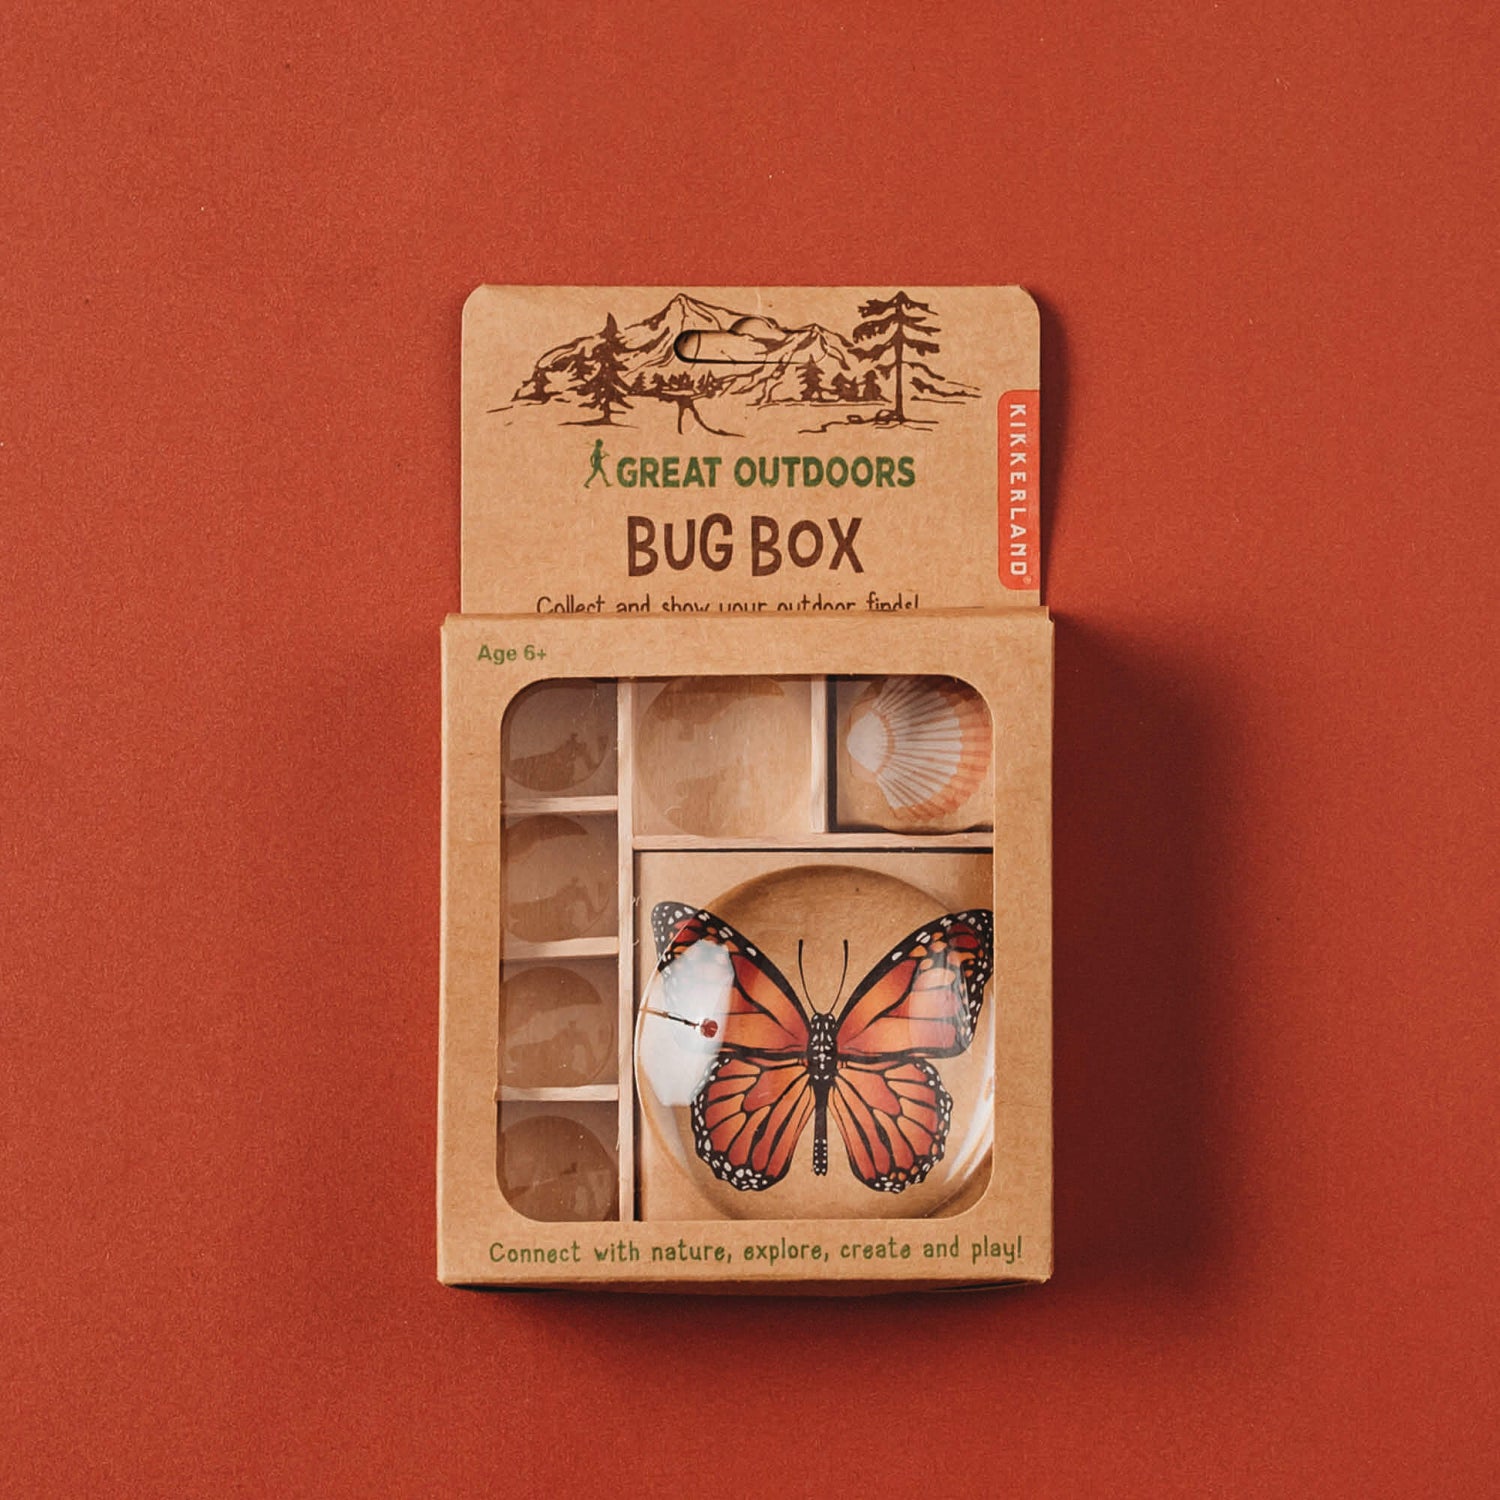 Storage for nature finds. Wooden bug box make by Kikkerland from Your Wild Books. 